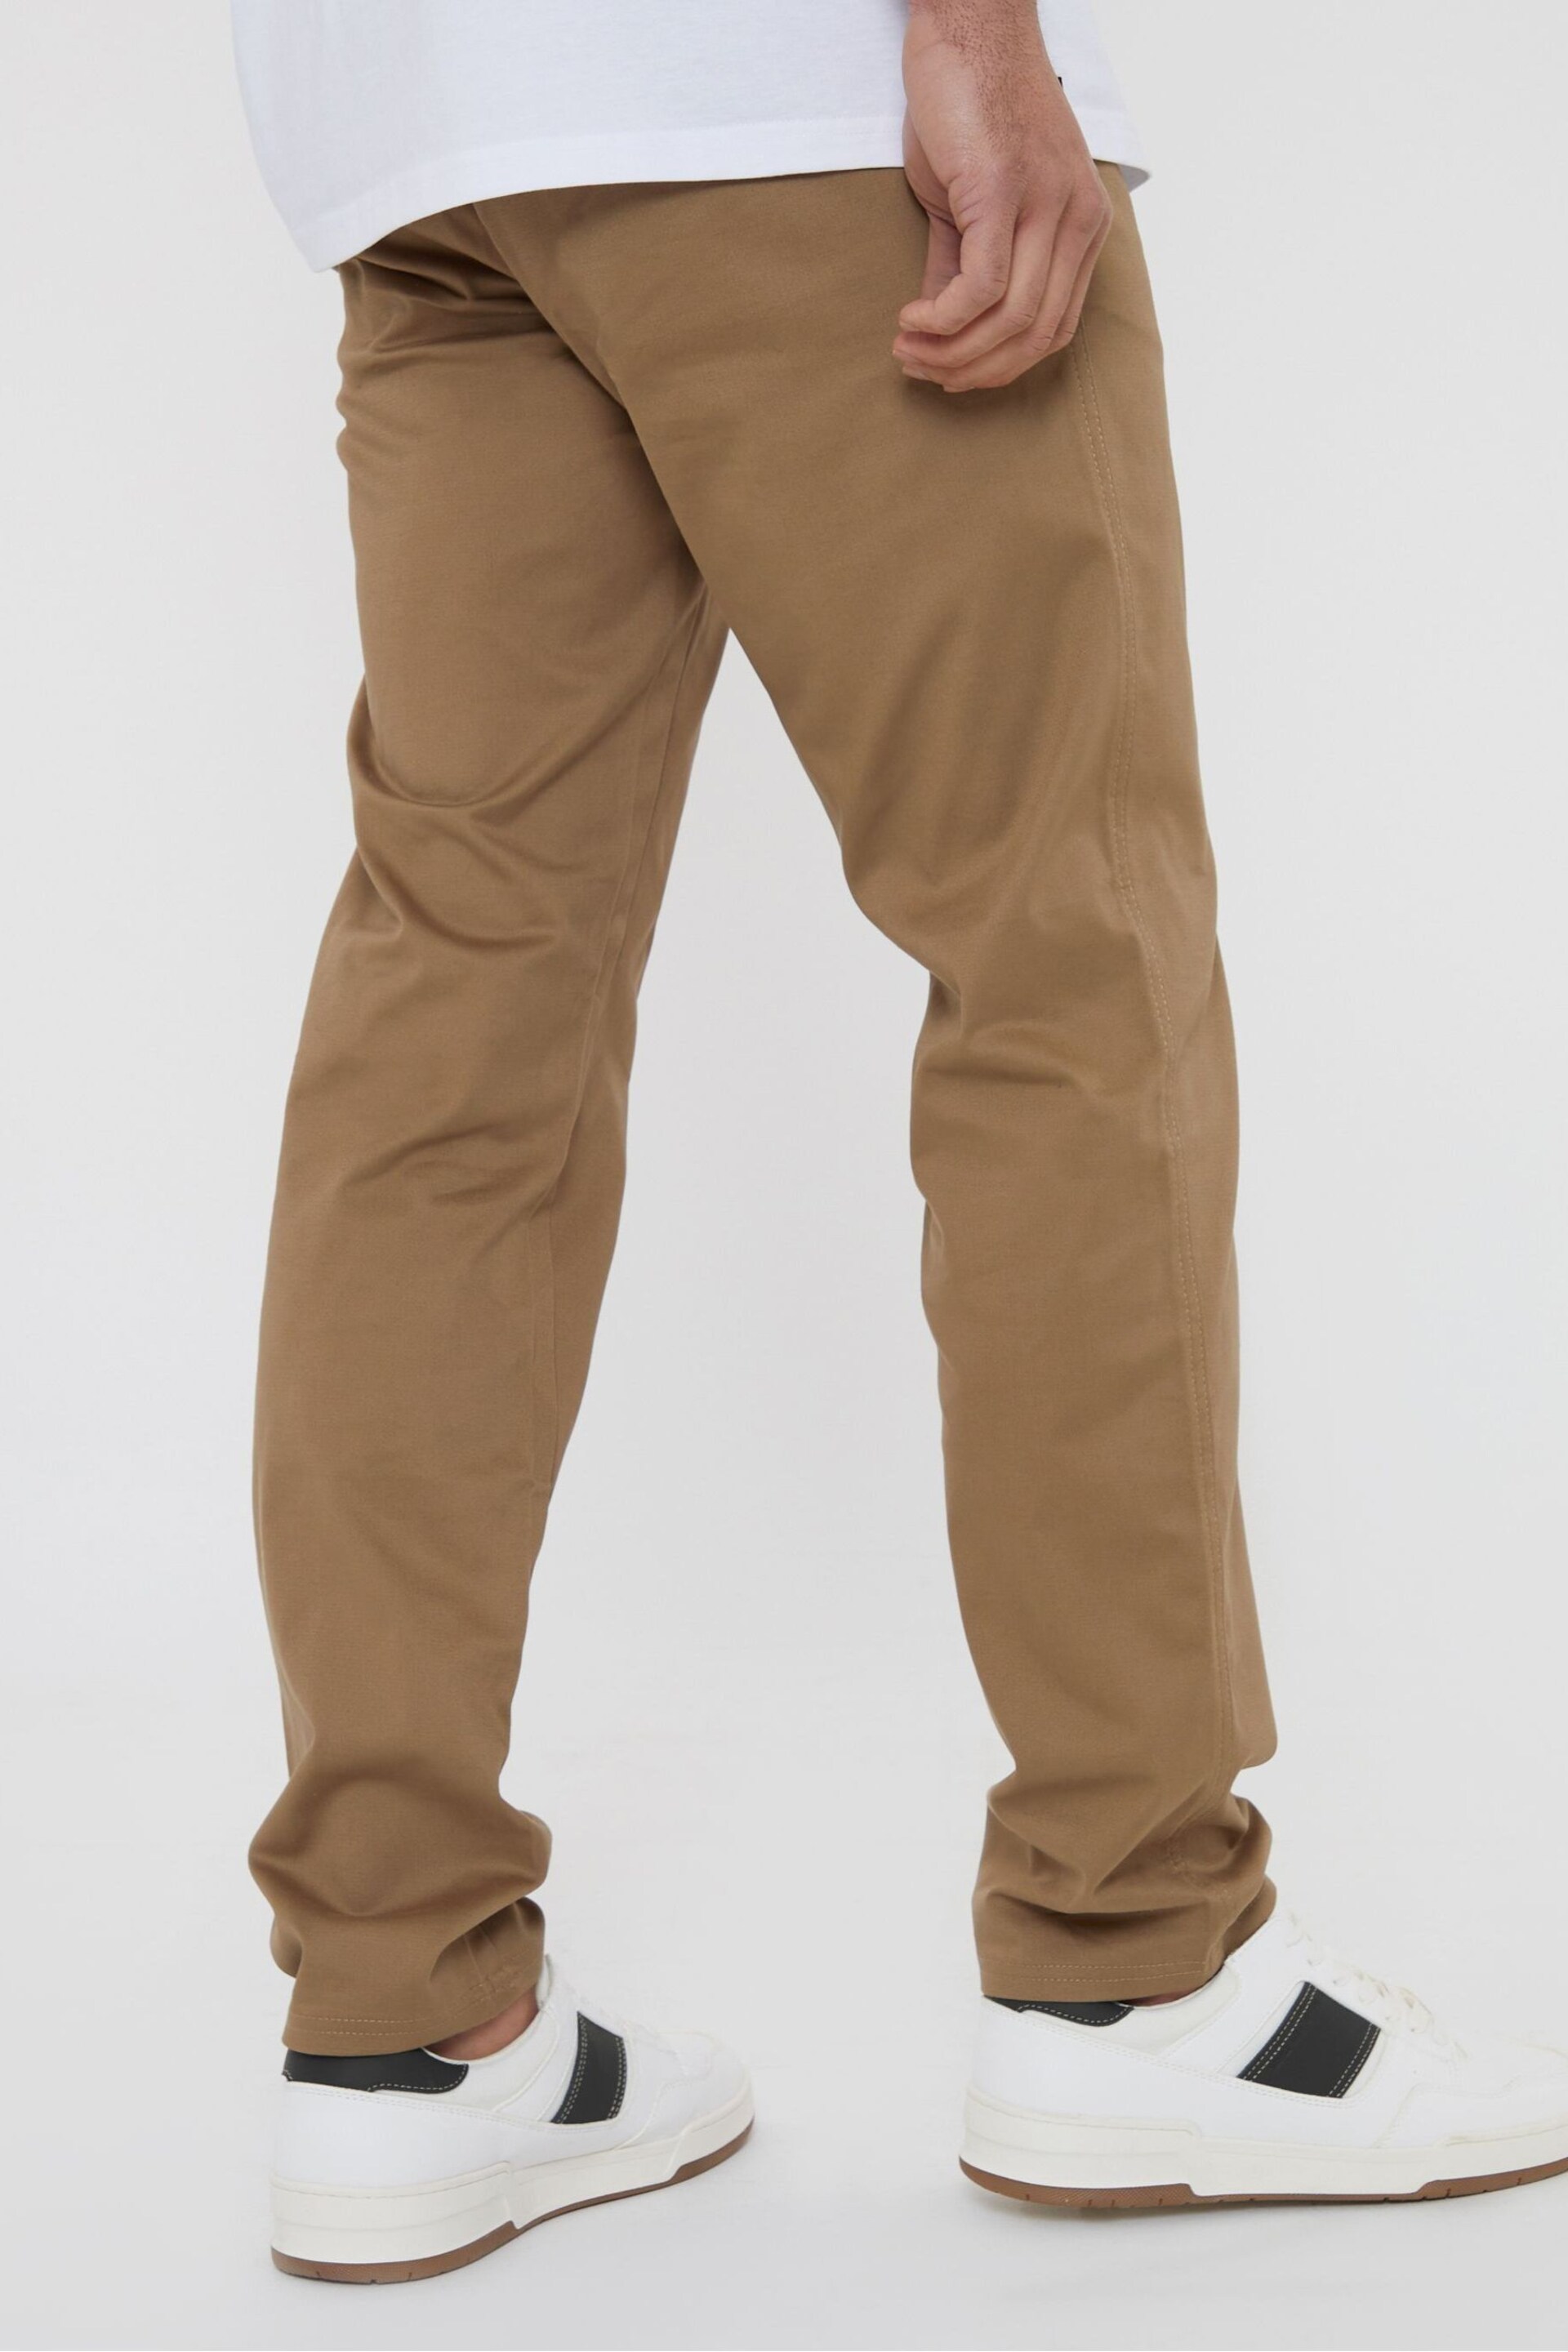 Threadbare Brown Cotton Regular Fit Chino Trousers with Stretch - Image 2 of 4